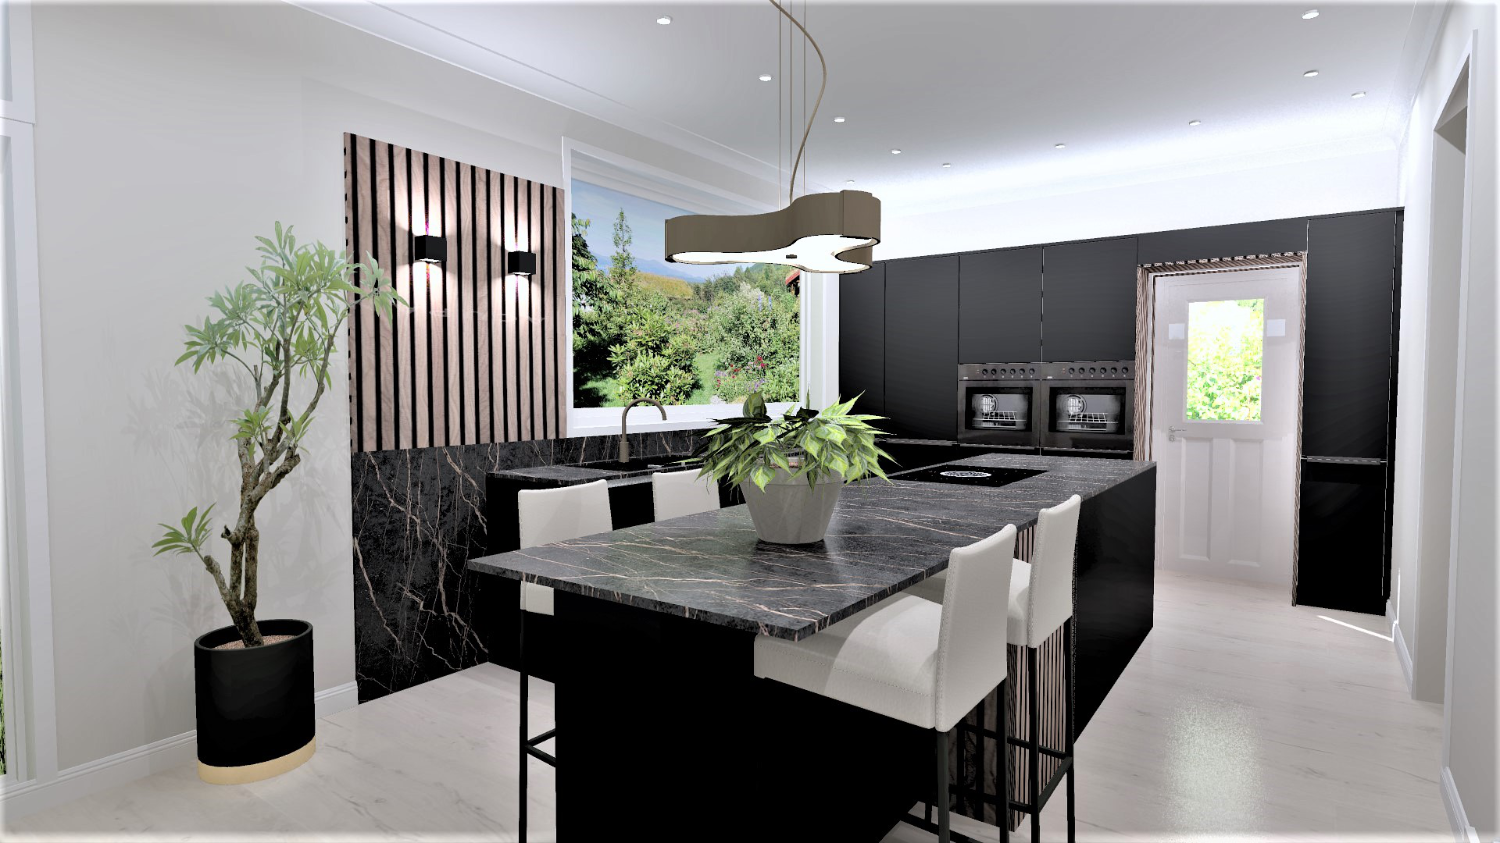 A statement kitchen lighting with pendant lighting, chandeliers and recessed lighting